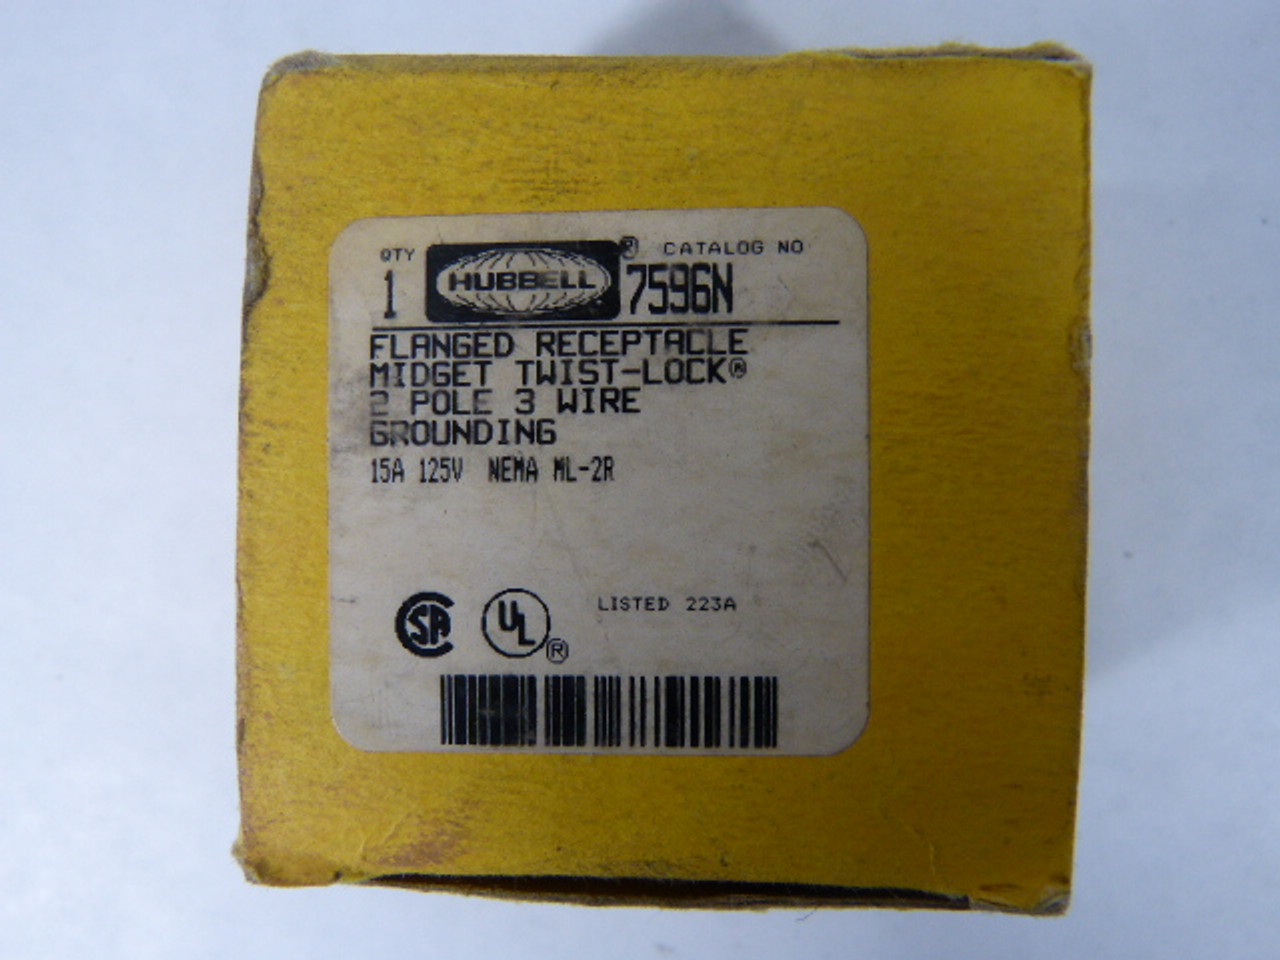 Hubbell 7596N Flanged Receptacle 15amp 125 3-Wire 2-Pole NEW